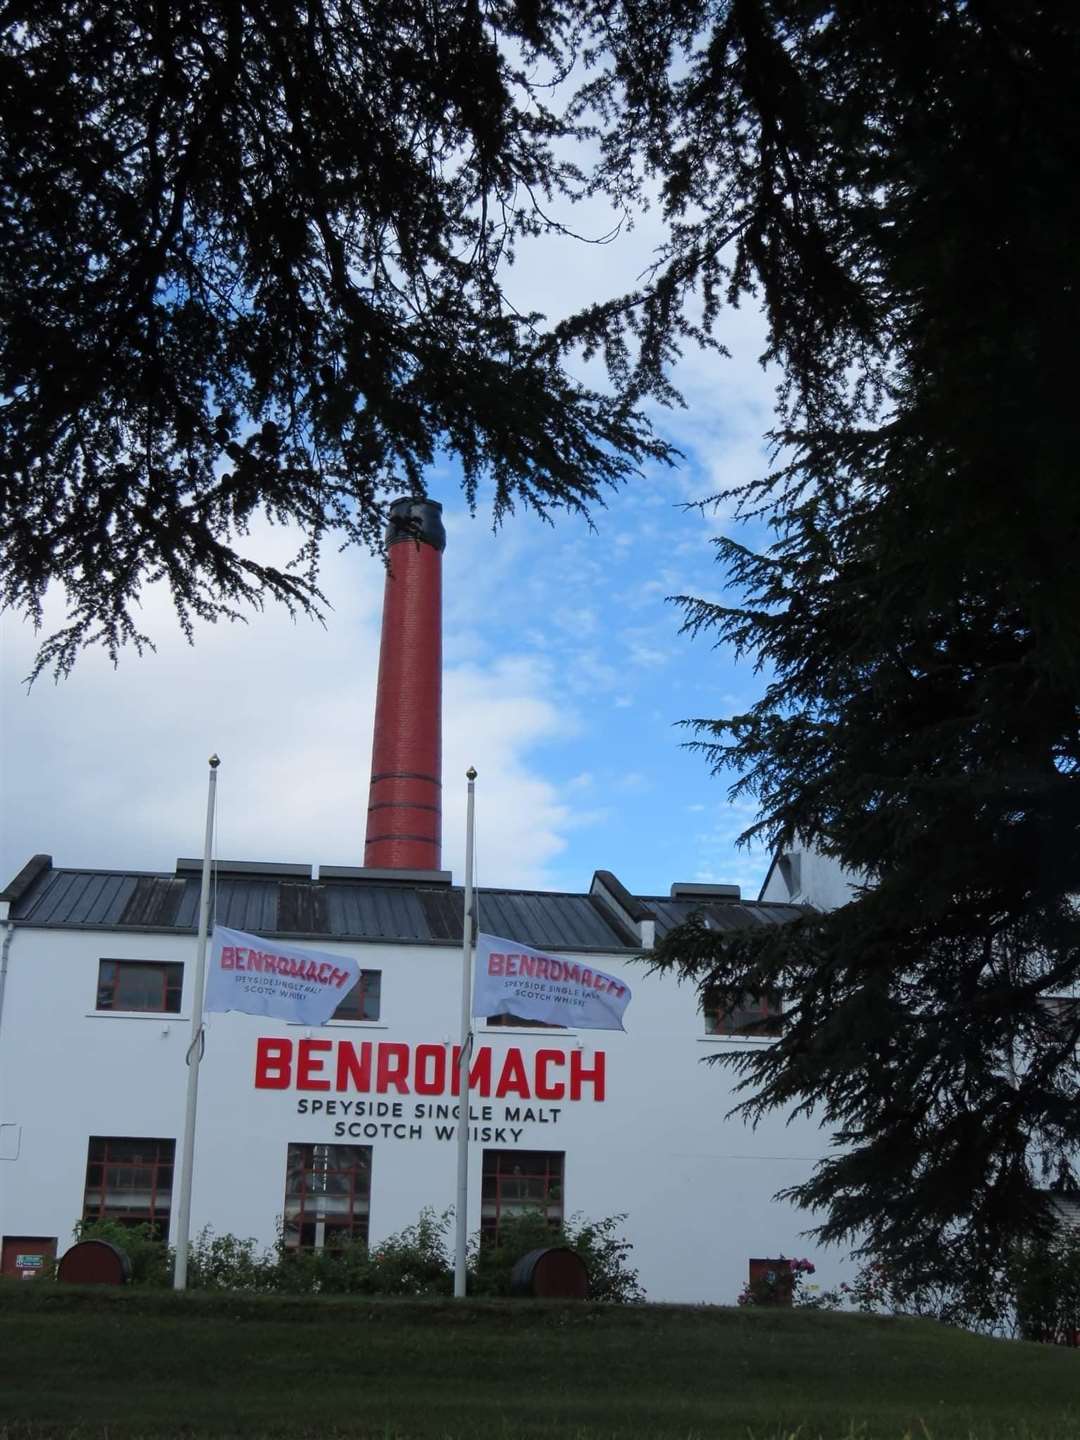 Flags were at half mast at Benromach Distillery.